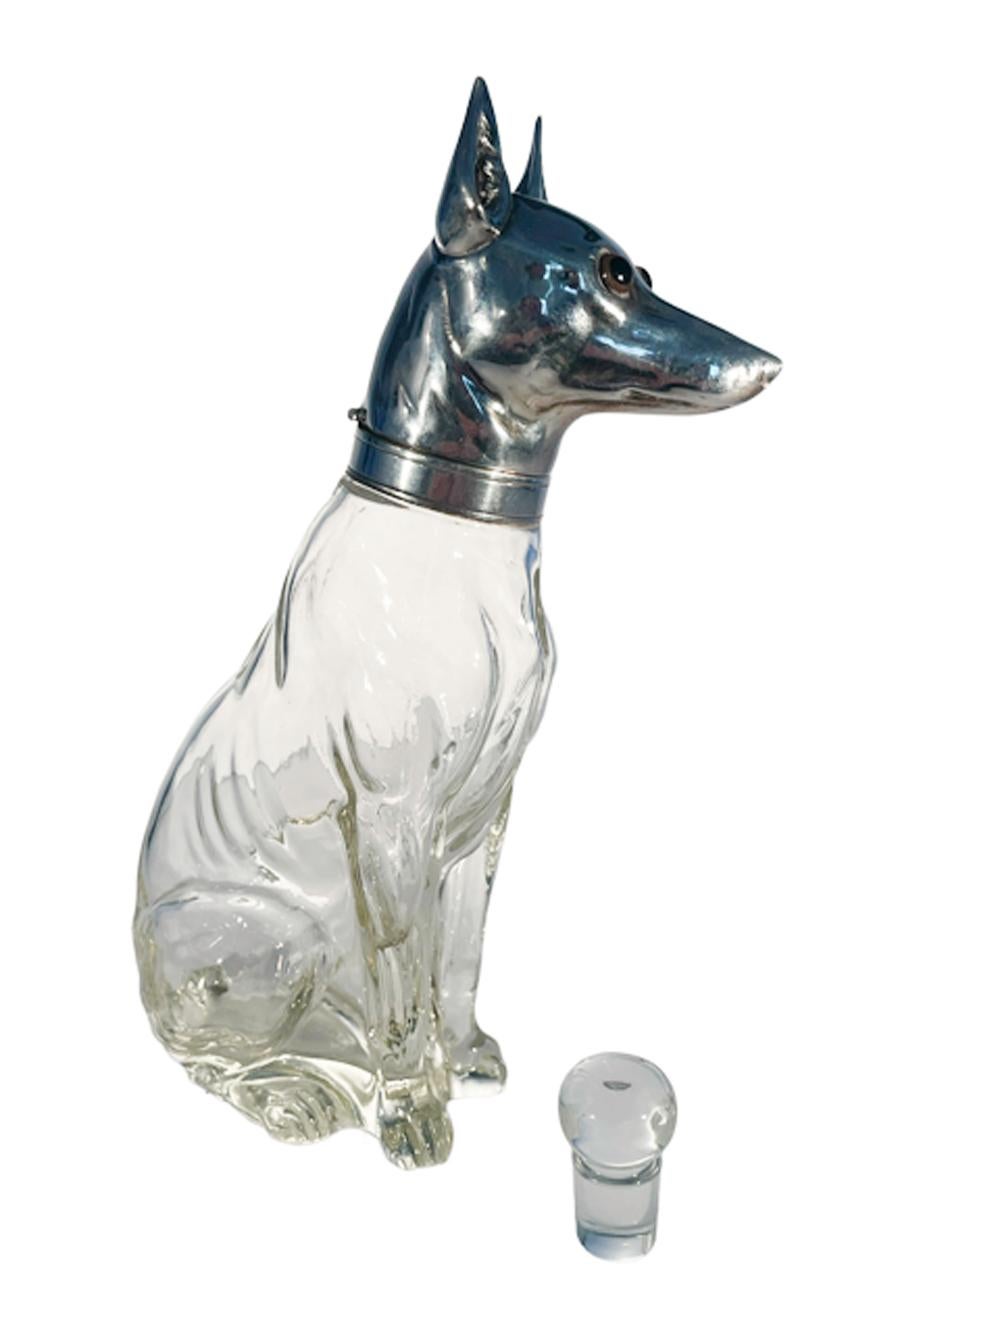 20th Century Art Deco Greyhound or Whippet Decanter Glass w/Silver Plate Head with Glass Eyes For Sale